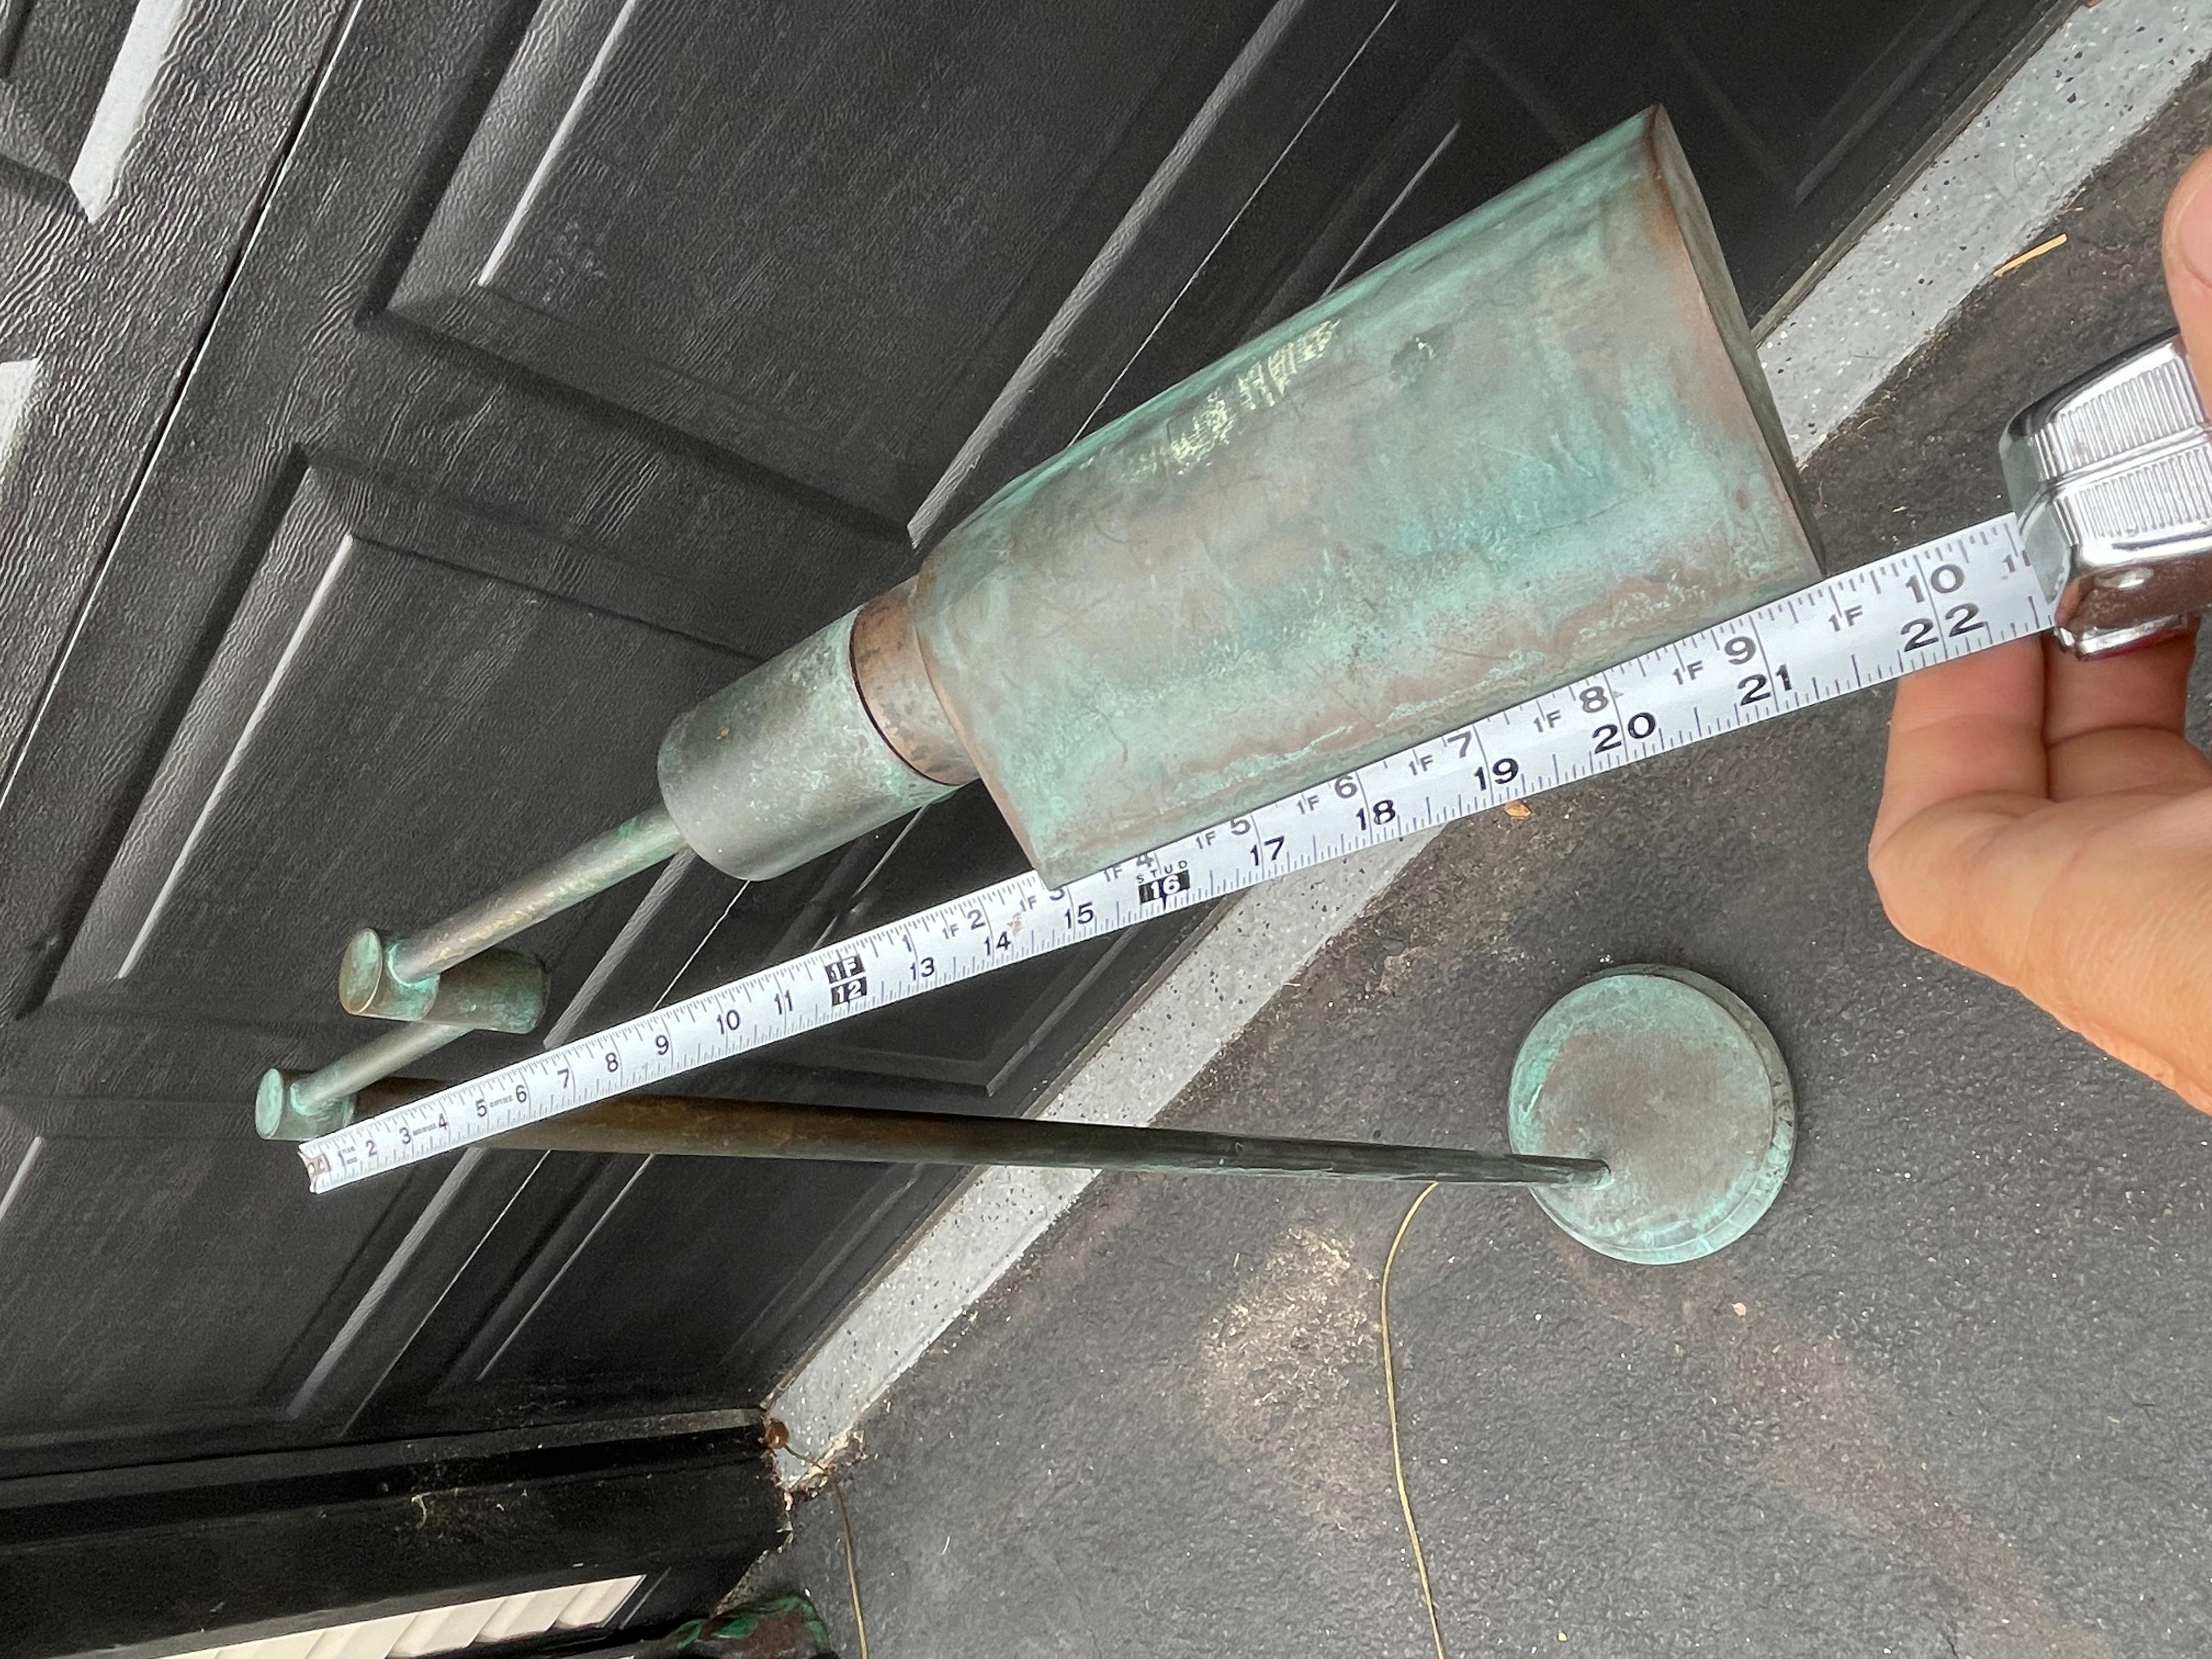 J.H. Lighting Oxidized Copper Swing Arm Floor Lamp In Good Condition For Sale In Bensalem, PA